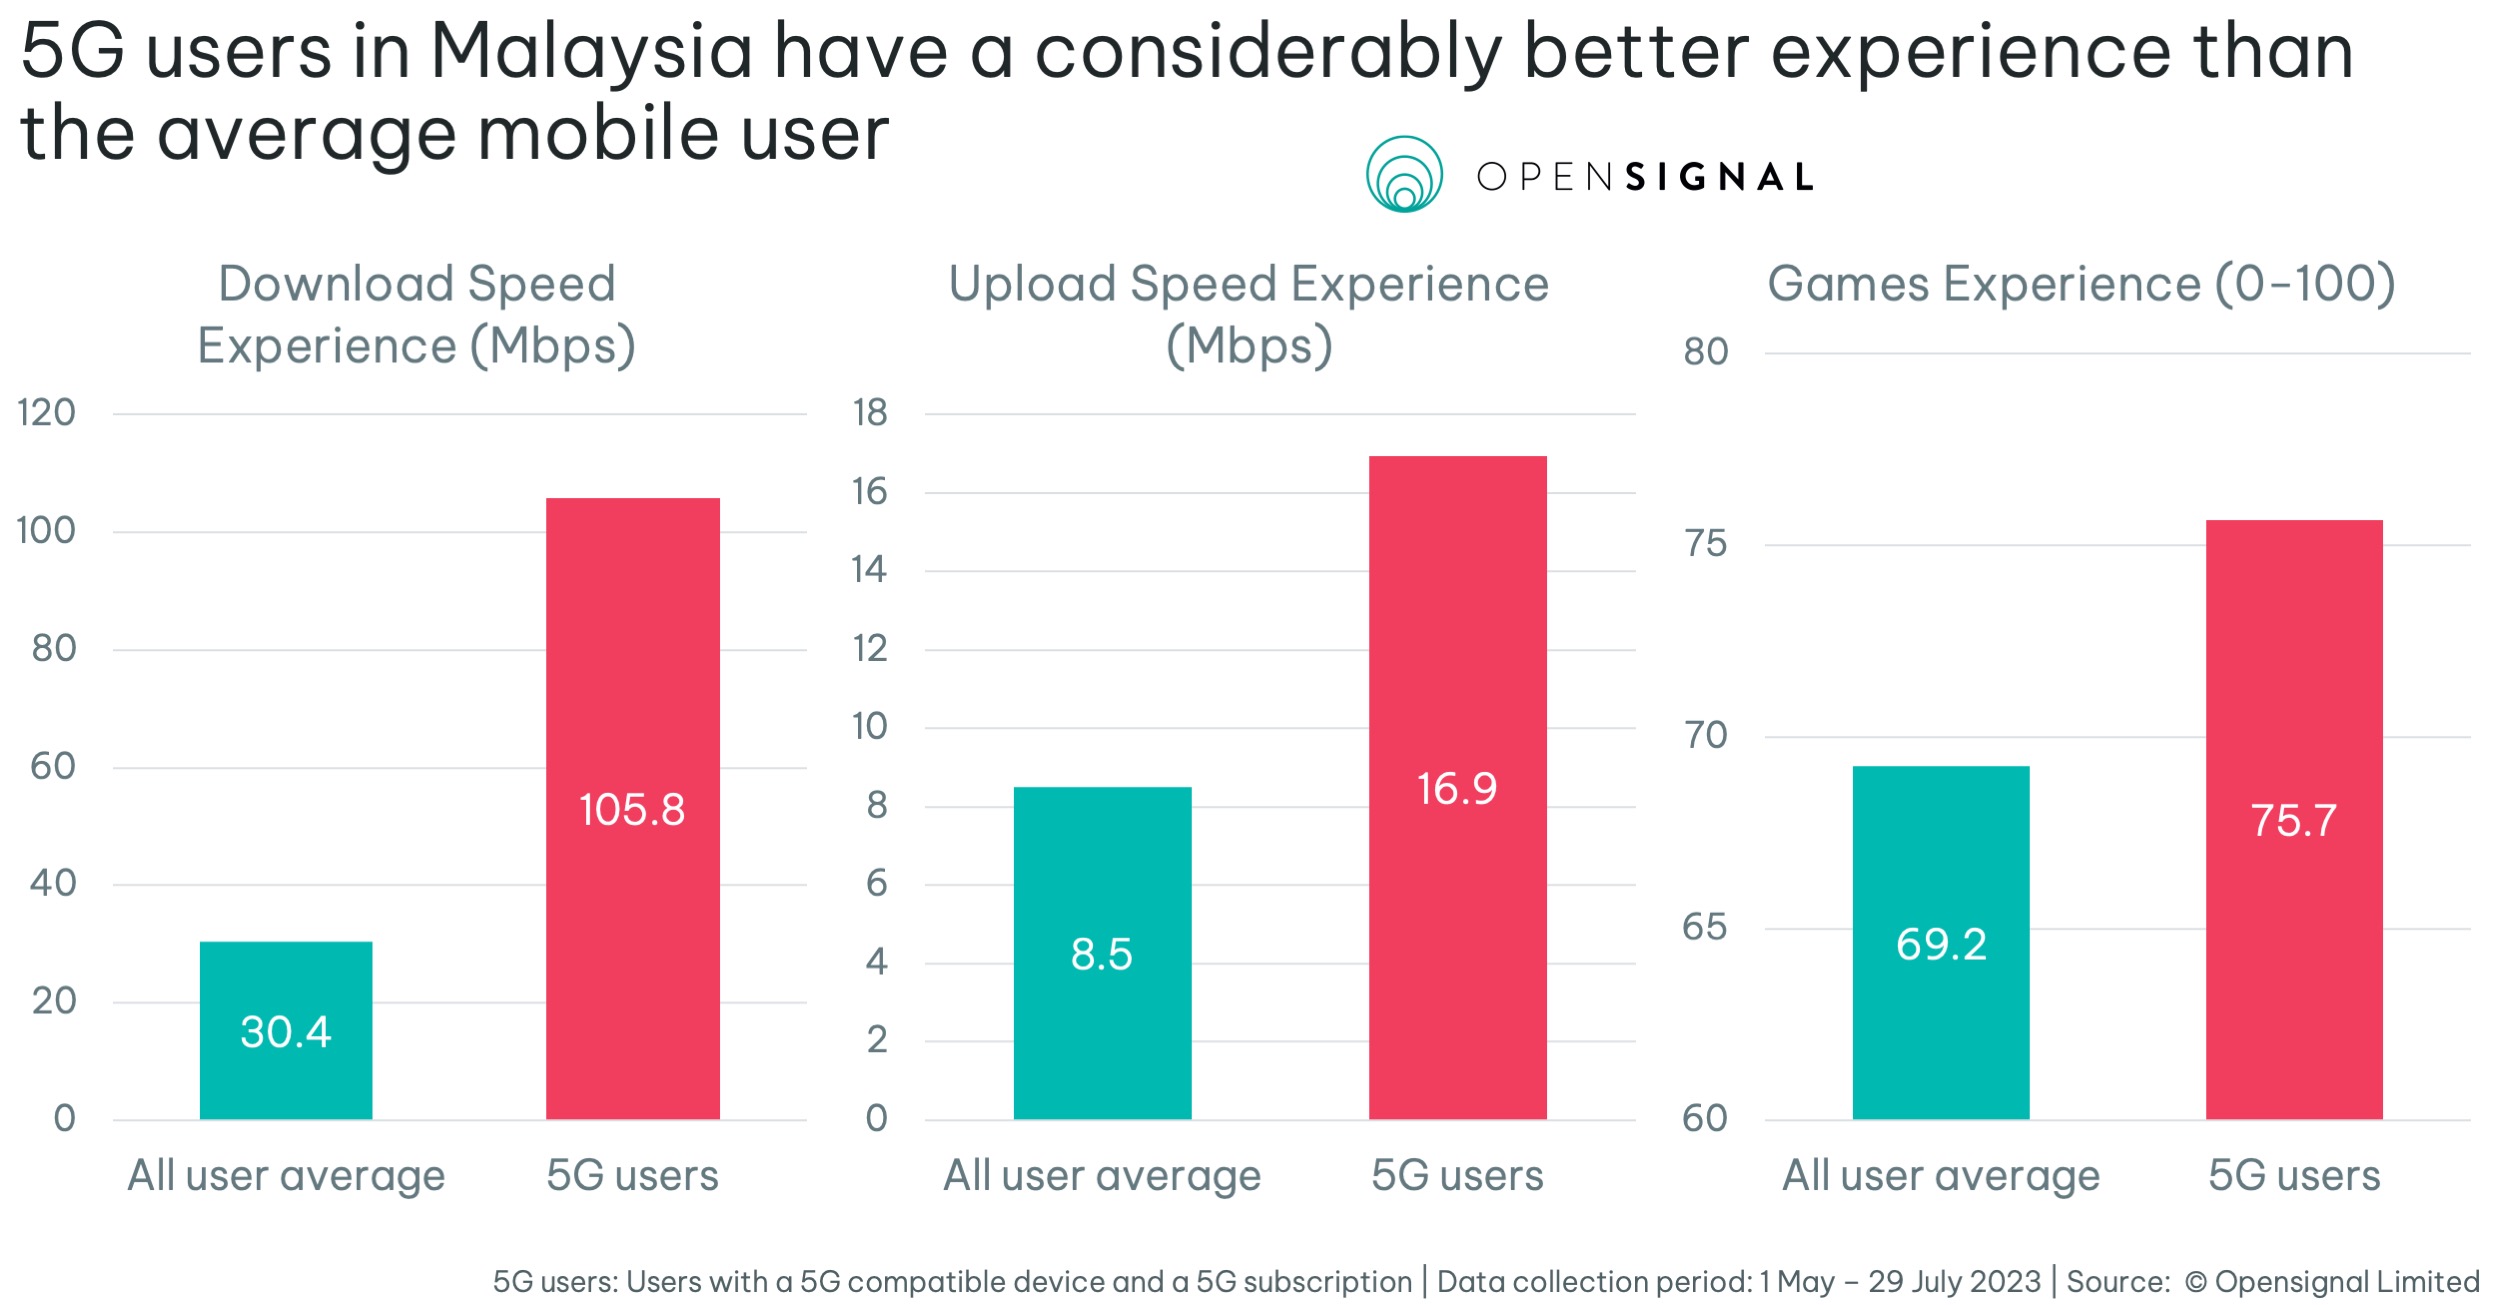 5G users in Malaysia have a considerably better experience than the average mobile user